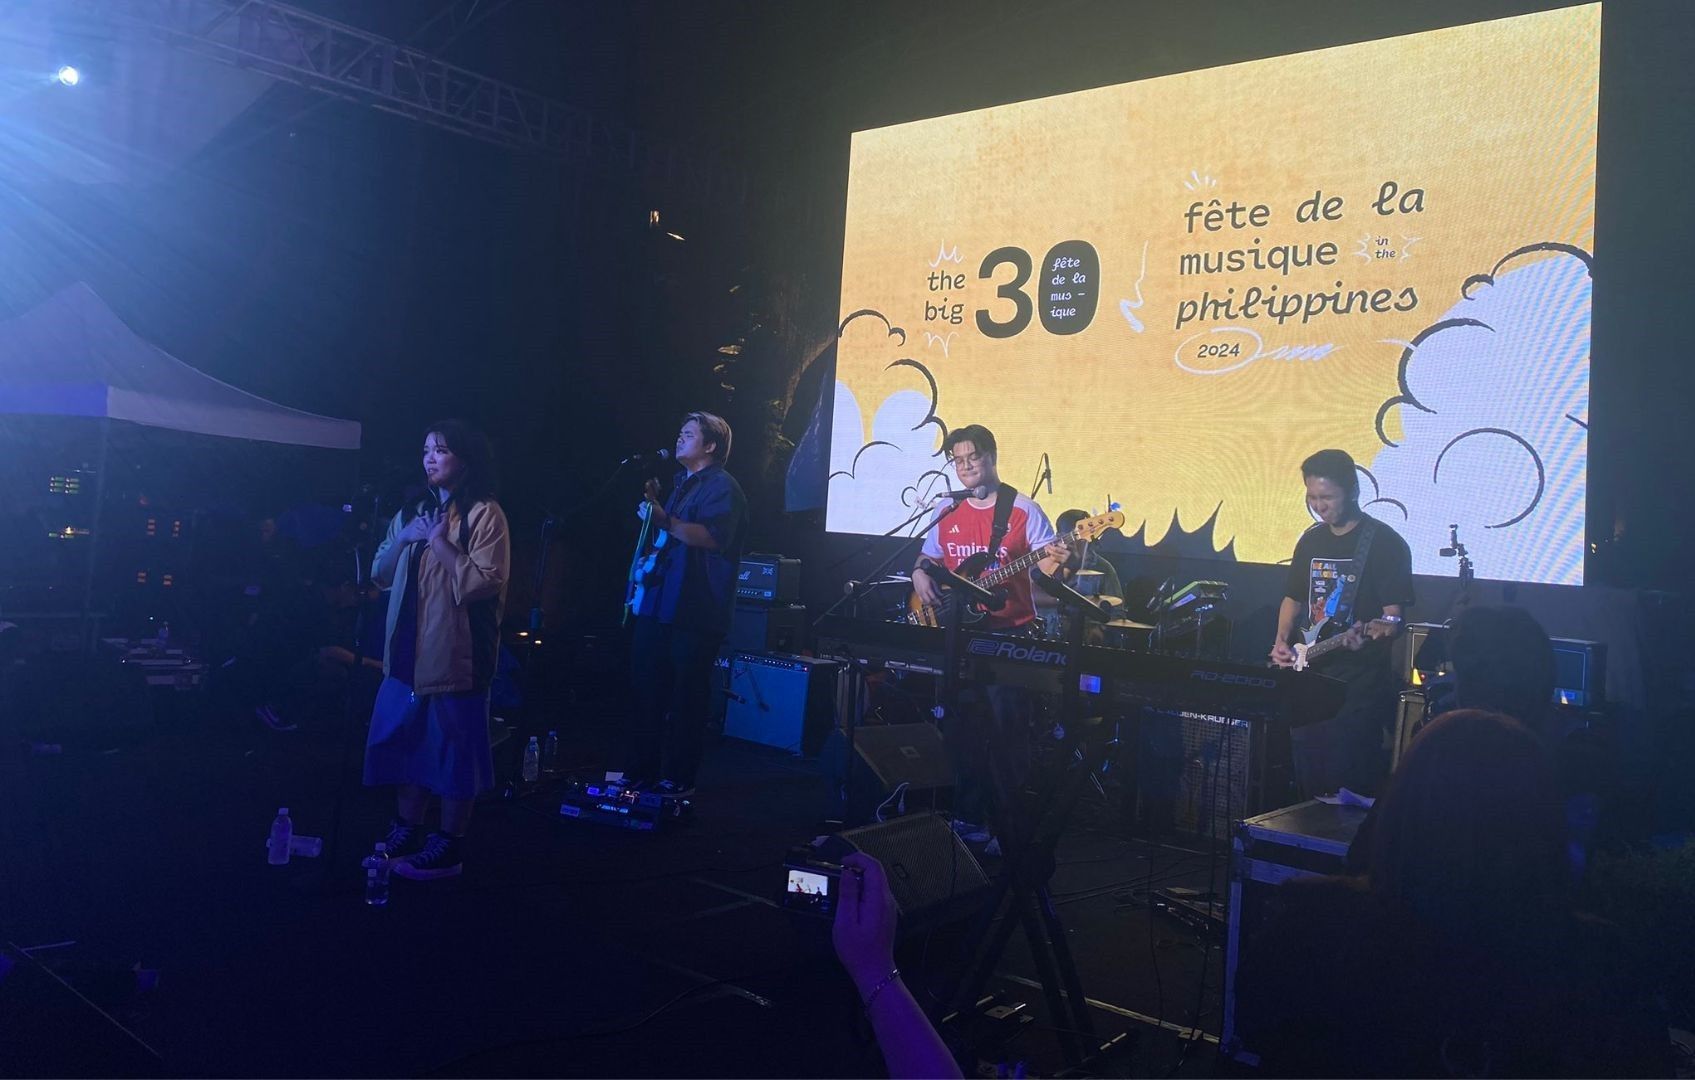 Fete de la Musique begins 30th year in the Philippines on high note